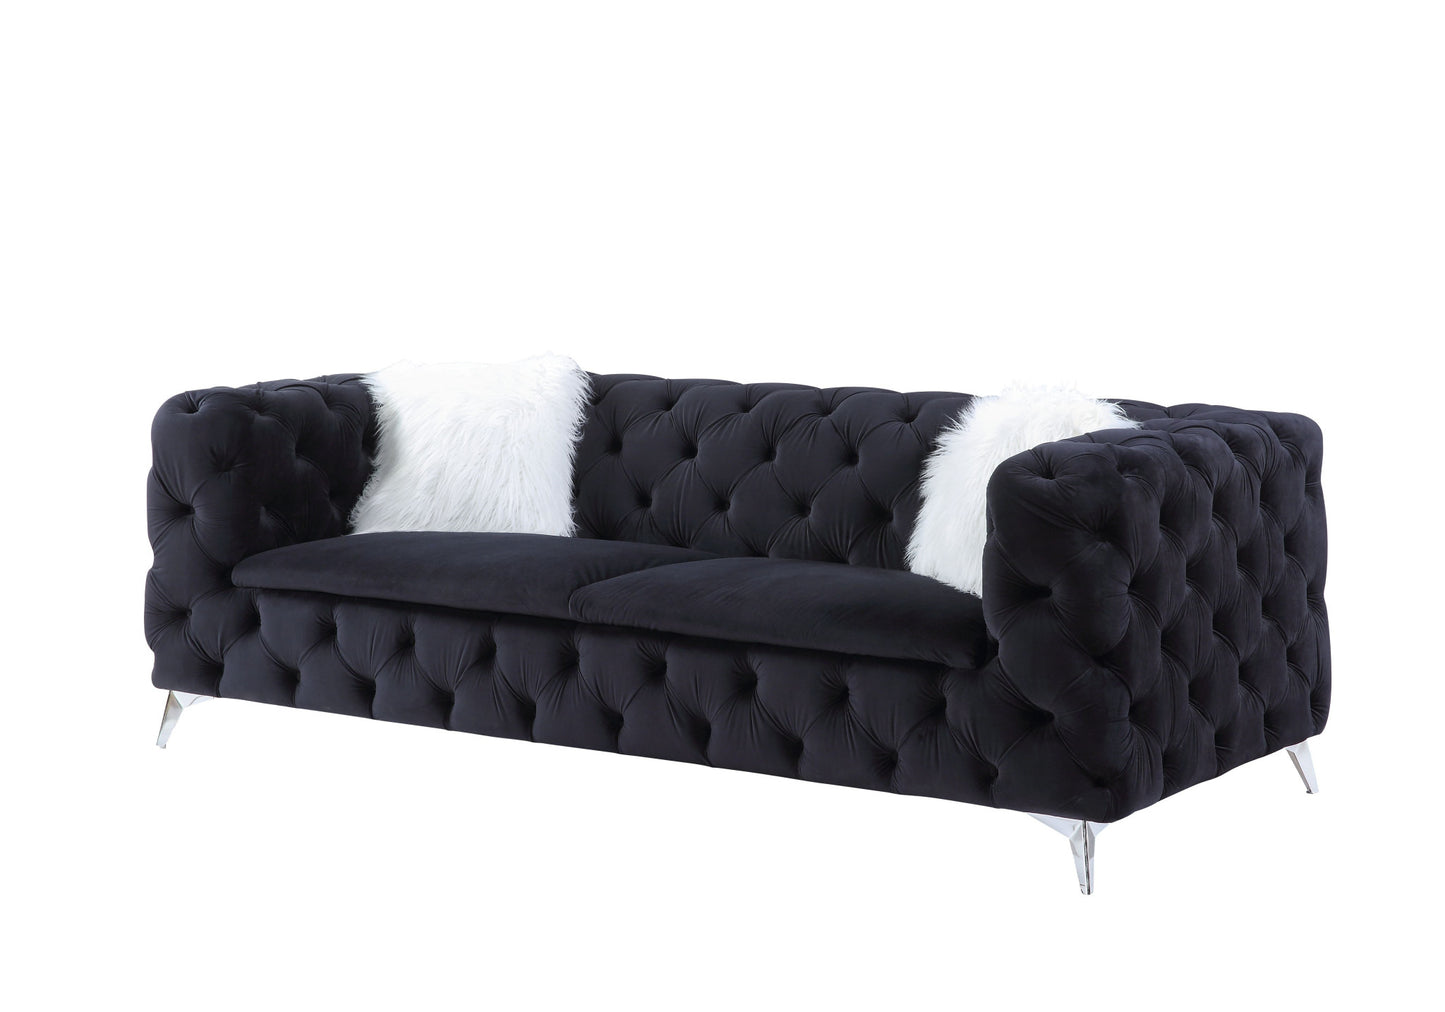 91" Black Velvet Sofa And Toss Pillows With Silver Legs